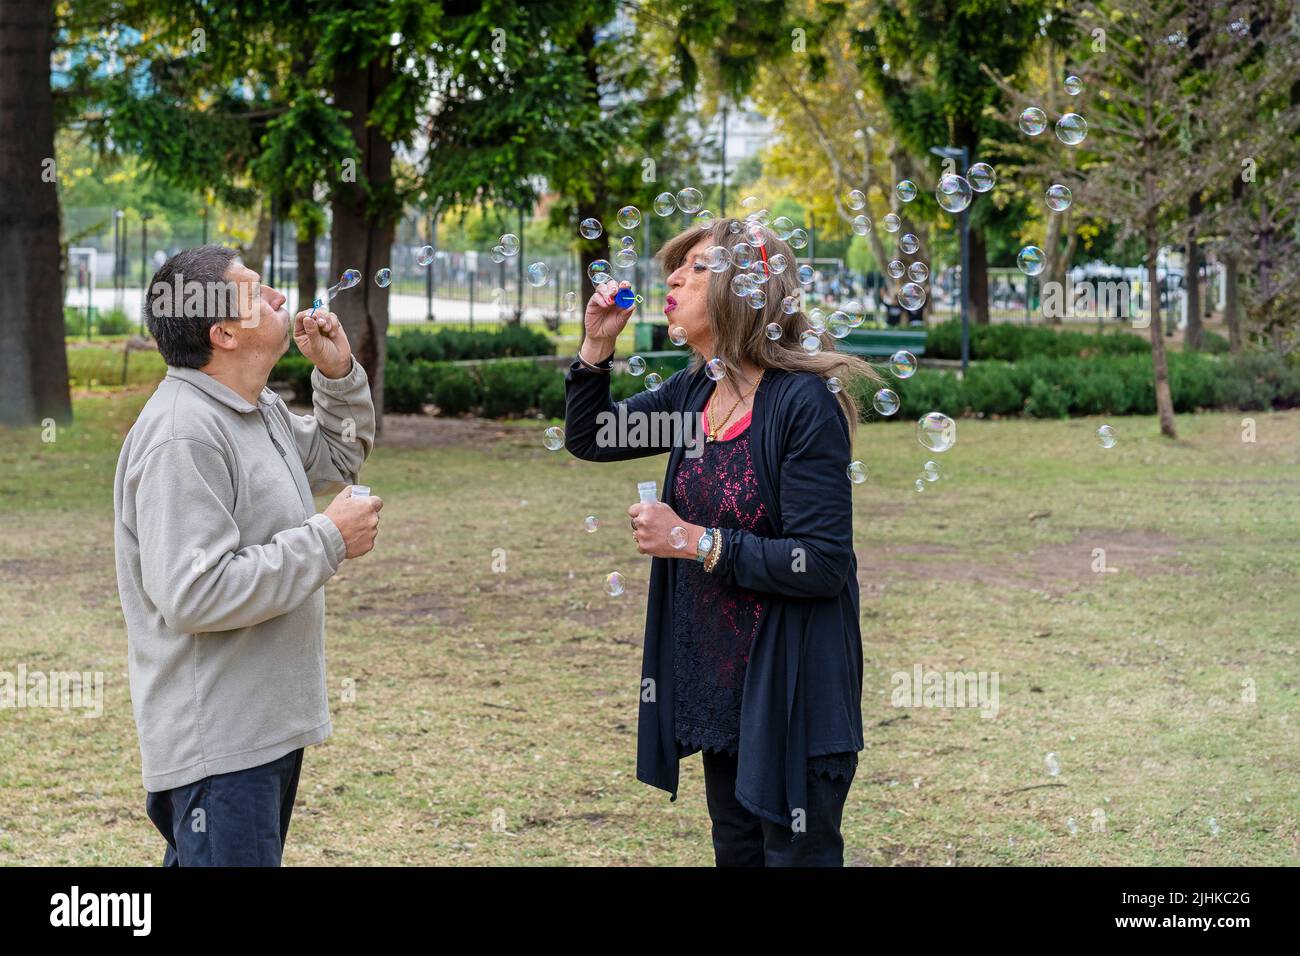 Cheerful mature queer couple blowing bubbles in a park Stock Photo